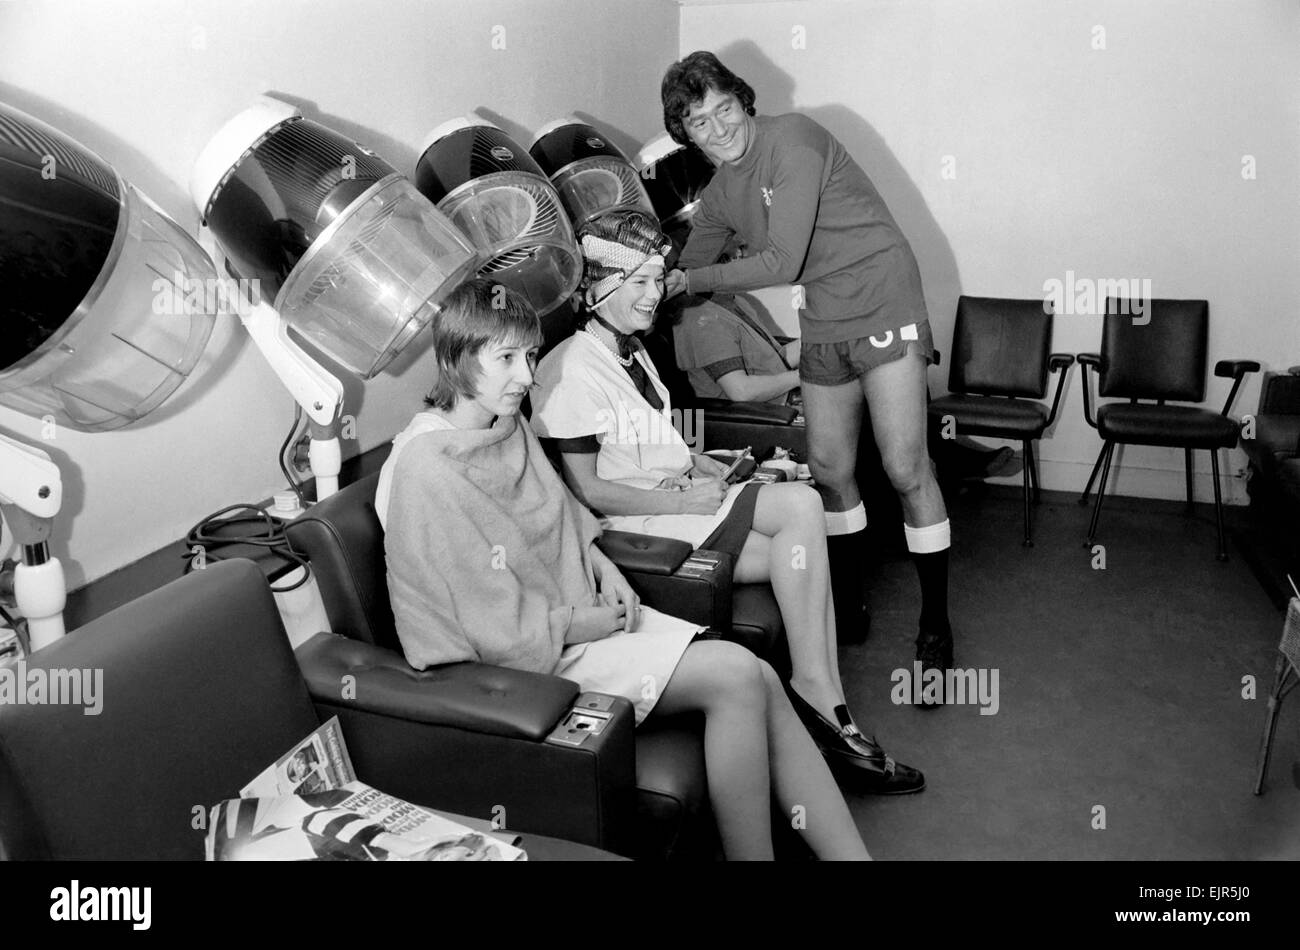 Football fan Vidal Sassoon made a solemn promise that if Chelsea reached the final of the Football League Cup the players and their wives would all get a free hair-do for the occasion. Chelsea are in the Final and Vidal kept this promise. Vidal Sassoon dressed in Chelsea's Football strip seen in the women's hairdressing salon attending to some clients . March 1972 72-2010-004 Stock Photo